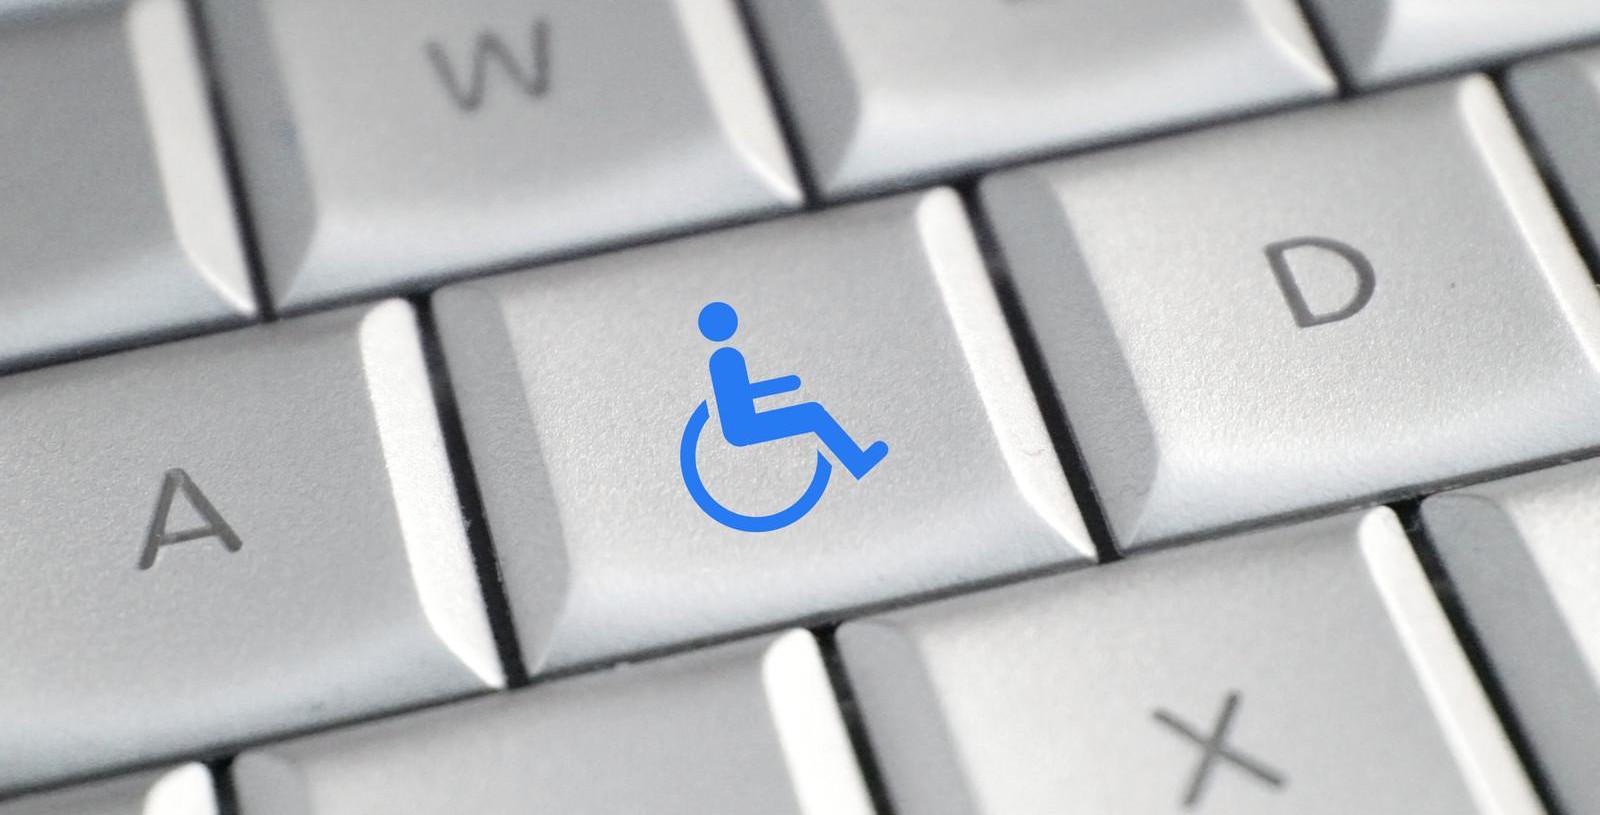 AODA and WCAG: 2021 Web Accessibility Standards Deadline for Ontario